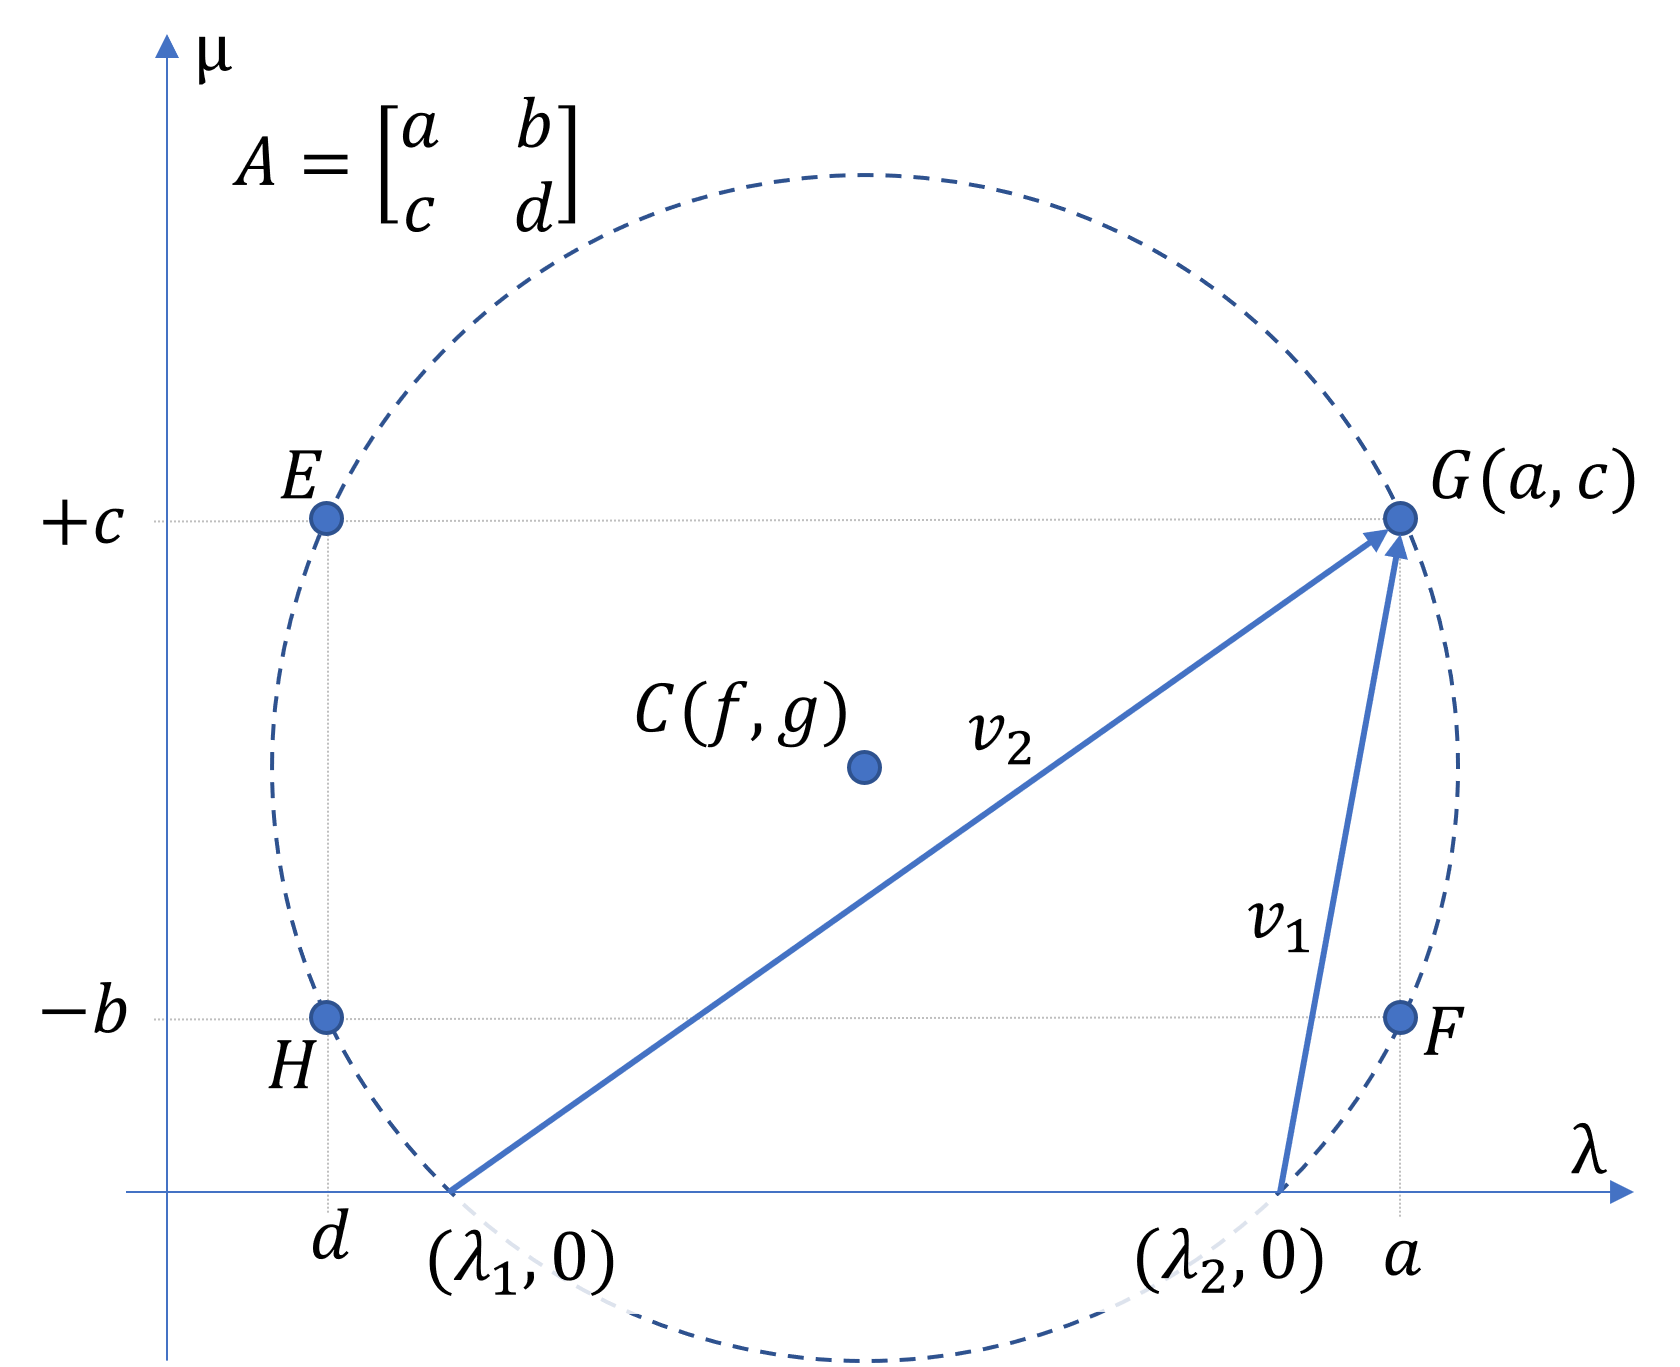 Reading eigenvectors and eigenvalues from an eigencircle